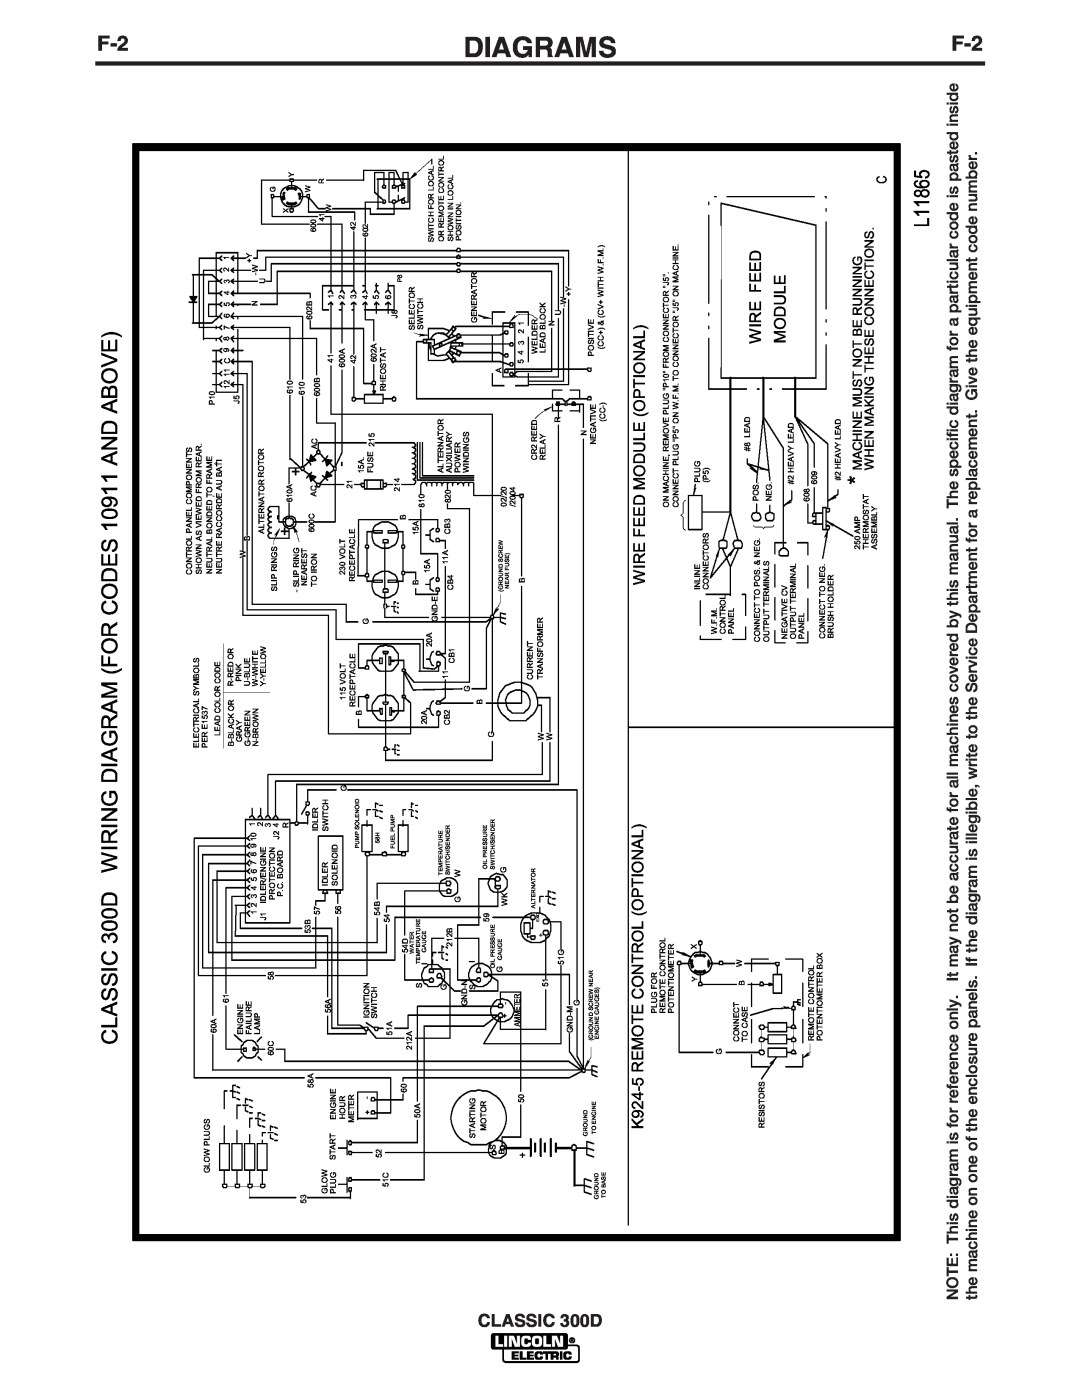 Lincoln Electric 300 D manual L11865, Diagrams, CLASSIC 300D WIRING DIAGRAM FOR CODES 10911 AND ABOVE 